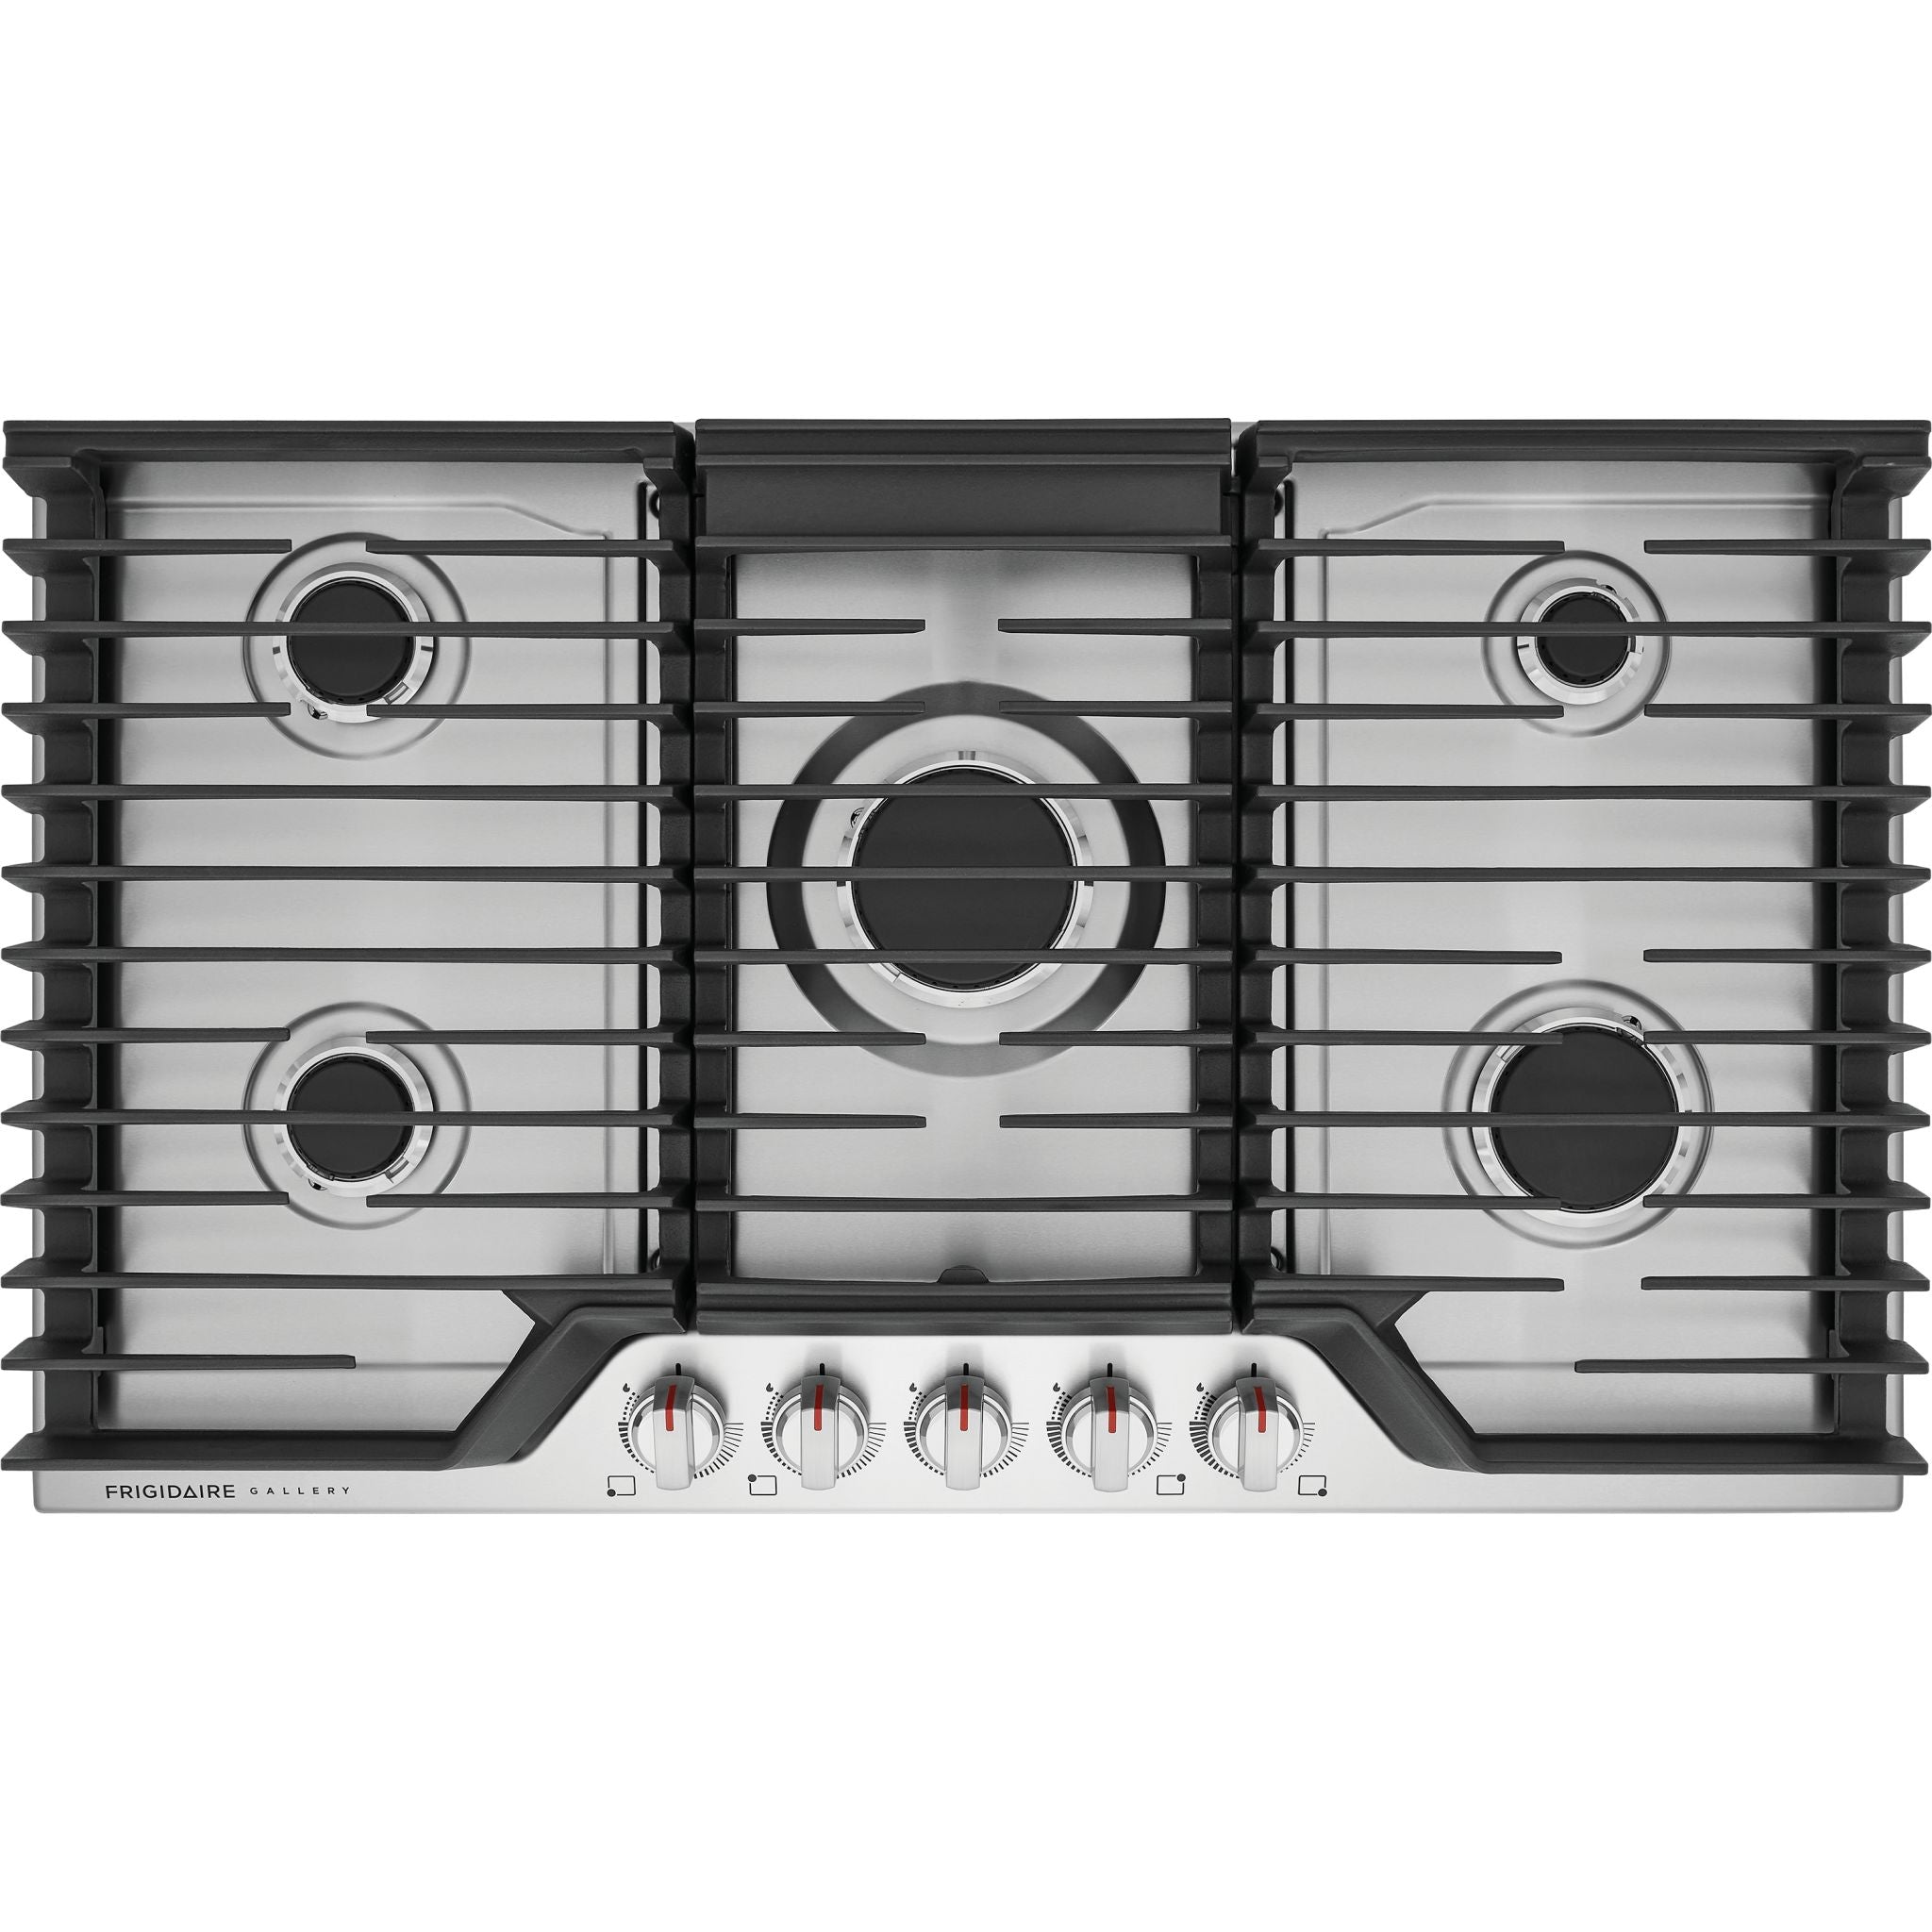 Frigidaire Gallery, Frigidaire Gallery 36" Gas Cooktop (GCCG3648AS) - Stainless Steel